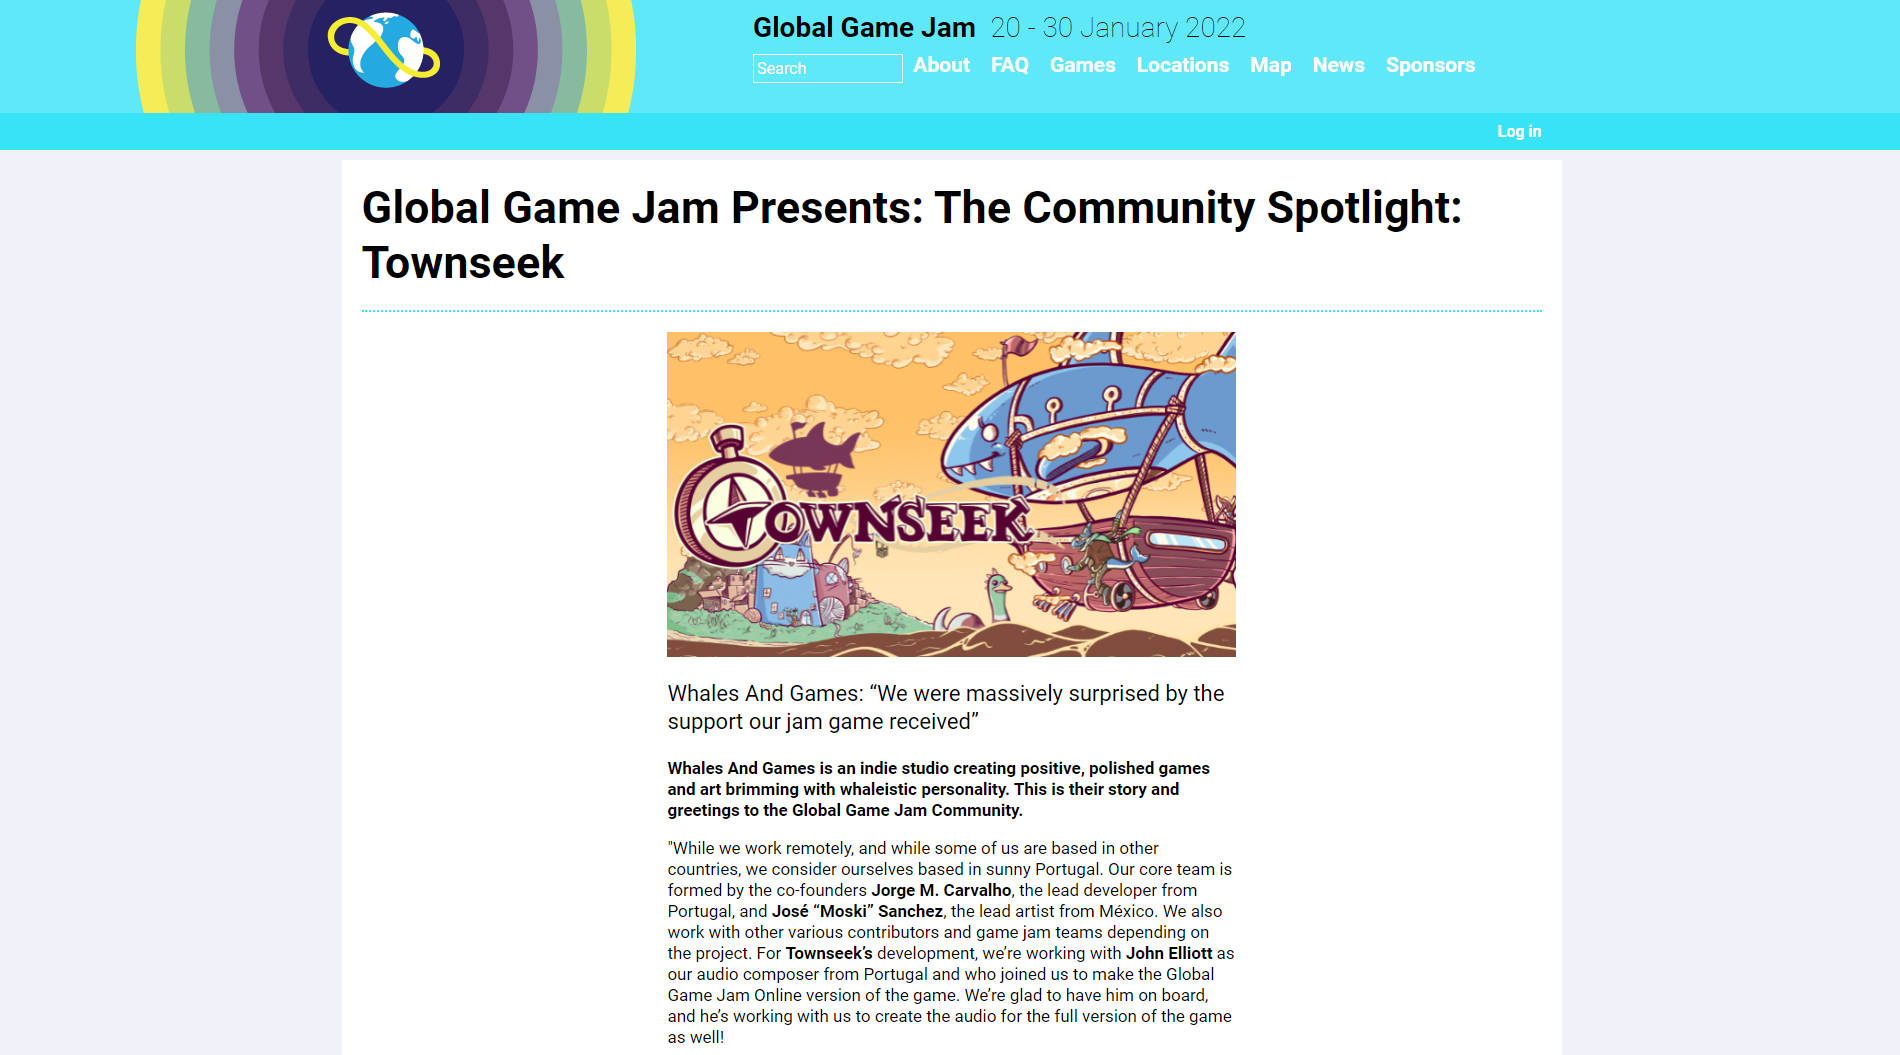 Invited by the folks at Global Game Jam, we had the opportunity to write about our experience with creating Townseek during the game jam!